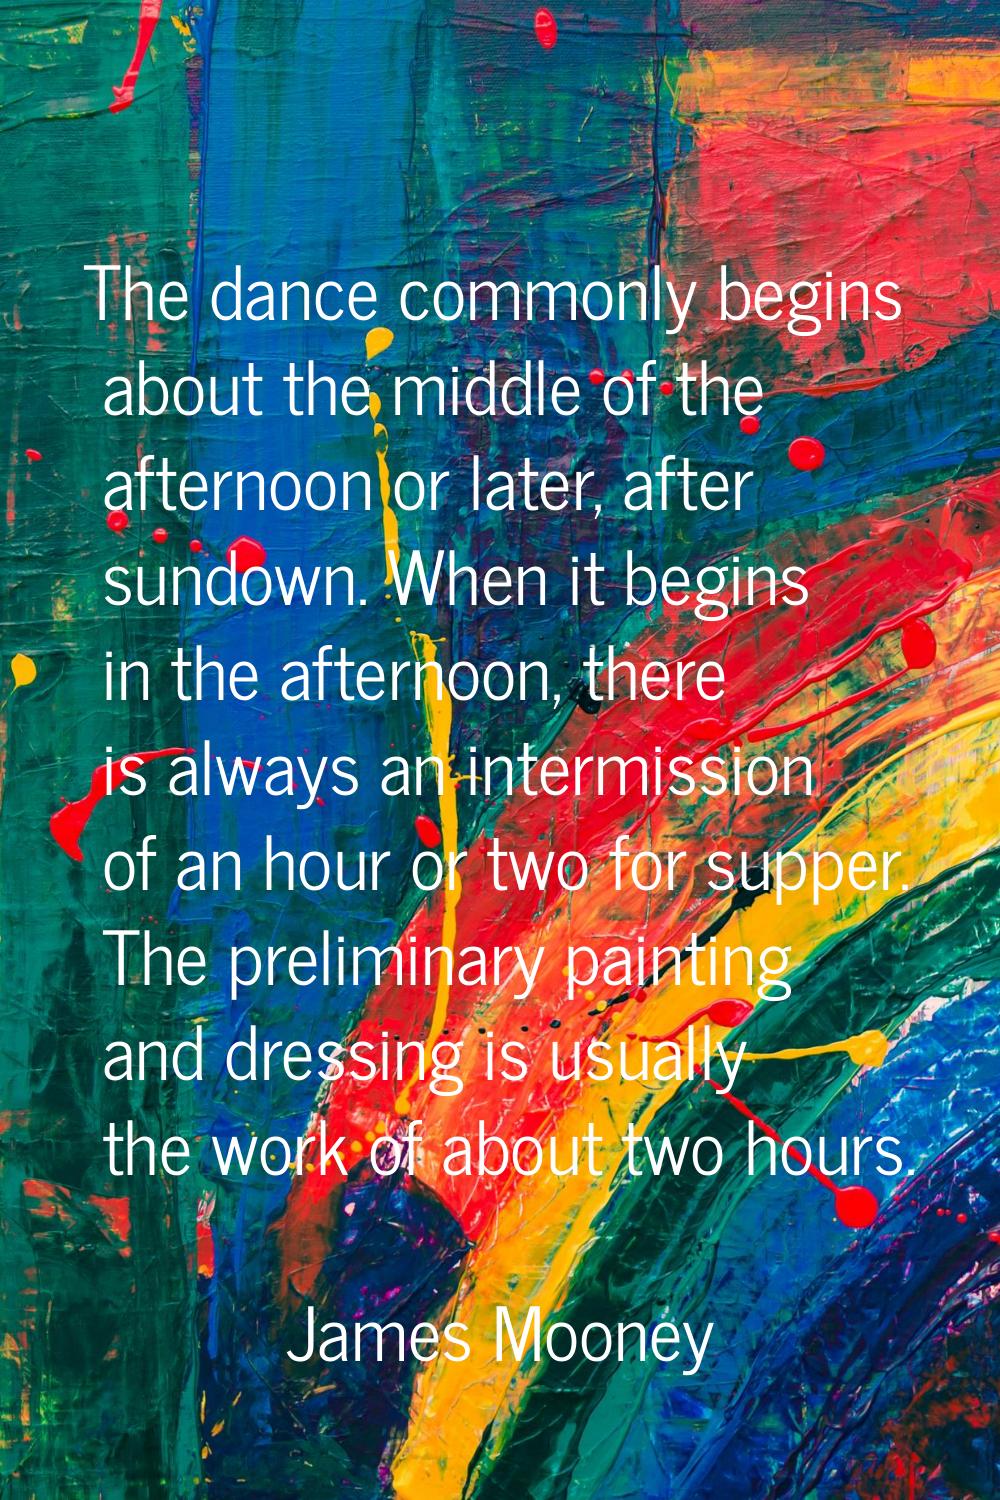 The dance commonly begins about the middle of the afternoon or later, after sundown. When it begins